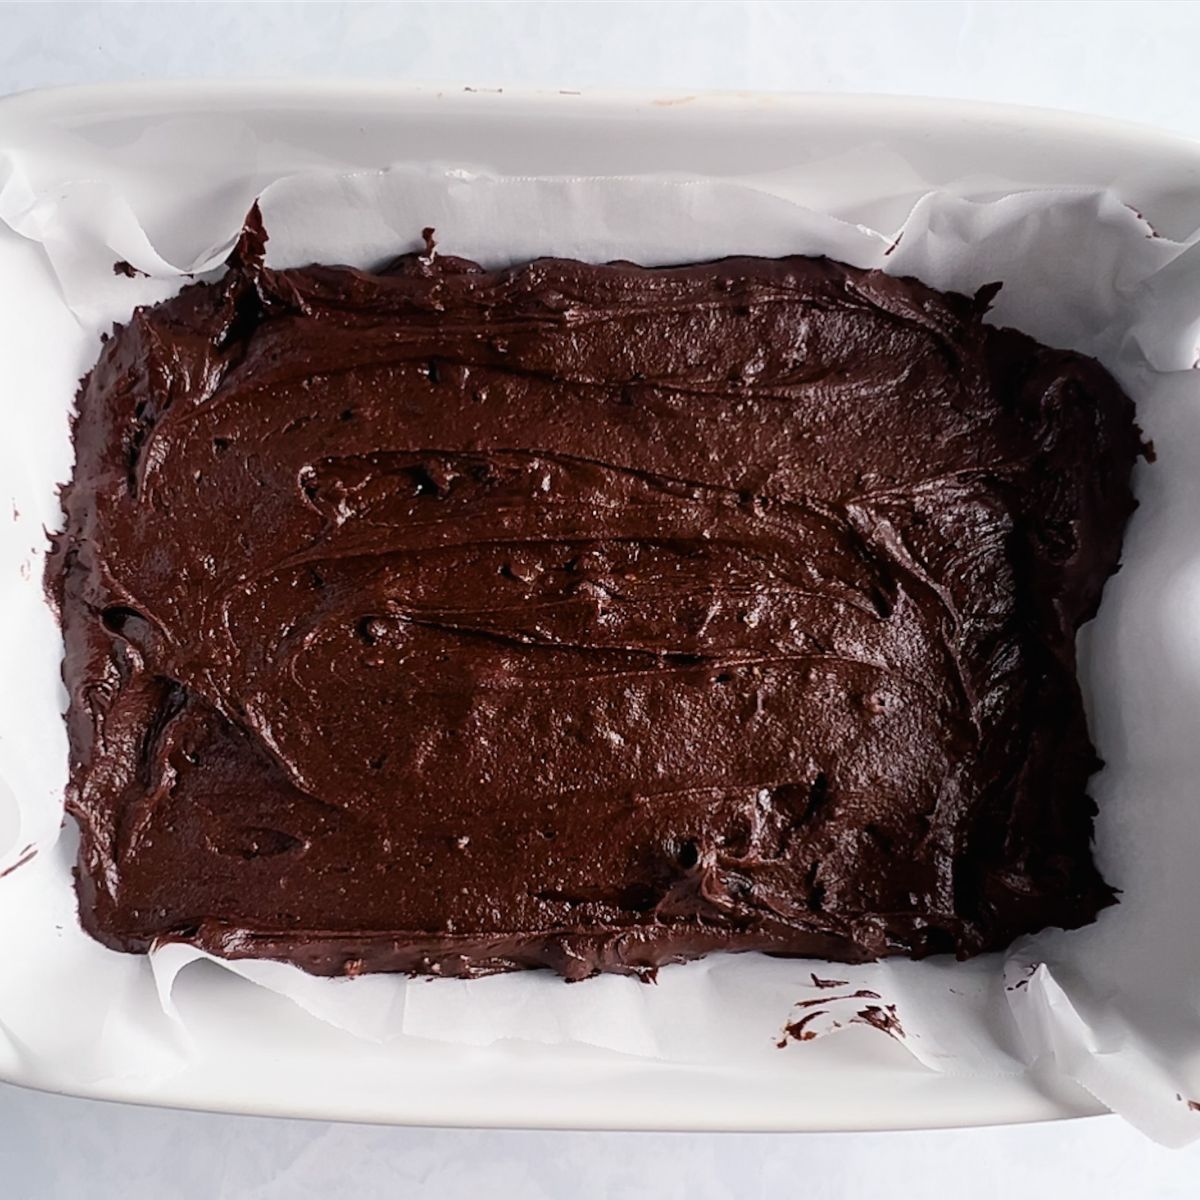 Brownie batter in a 9x13 baking dish on top of parchment paper.